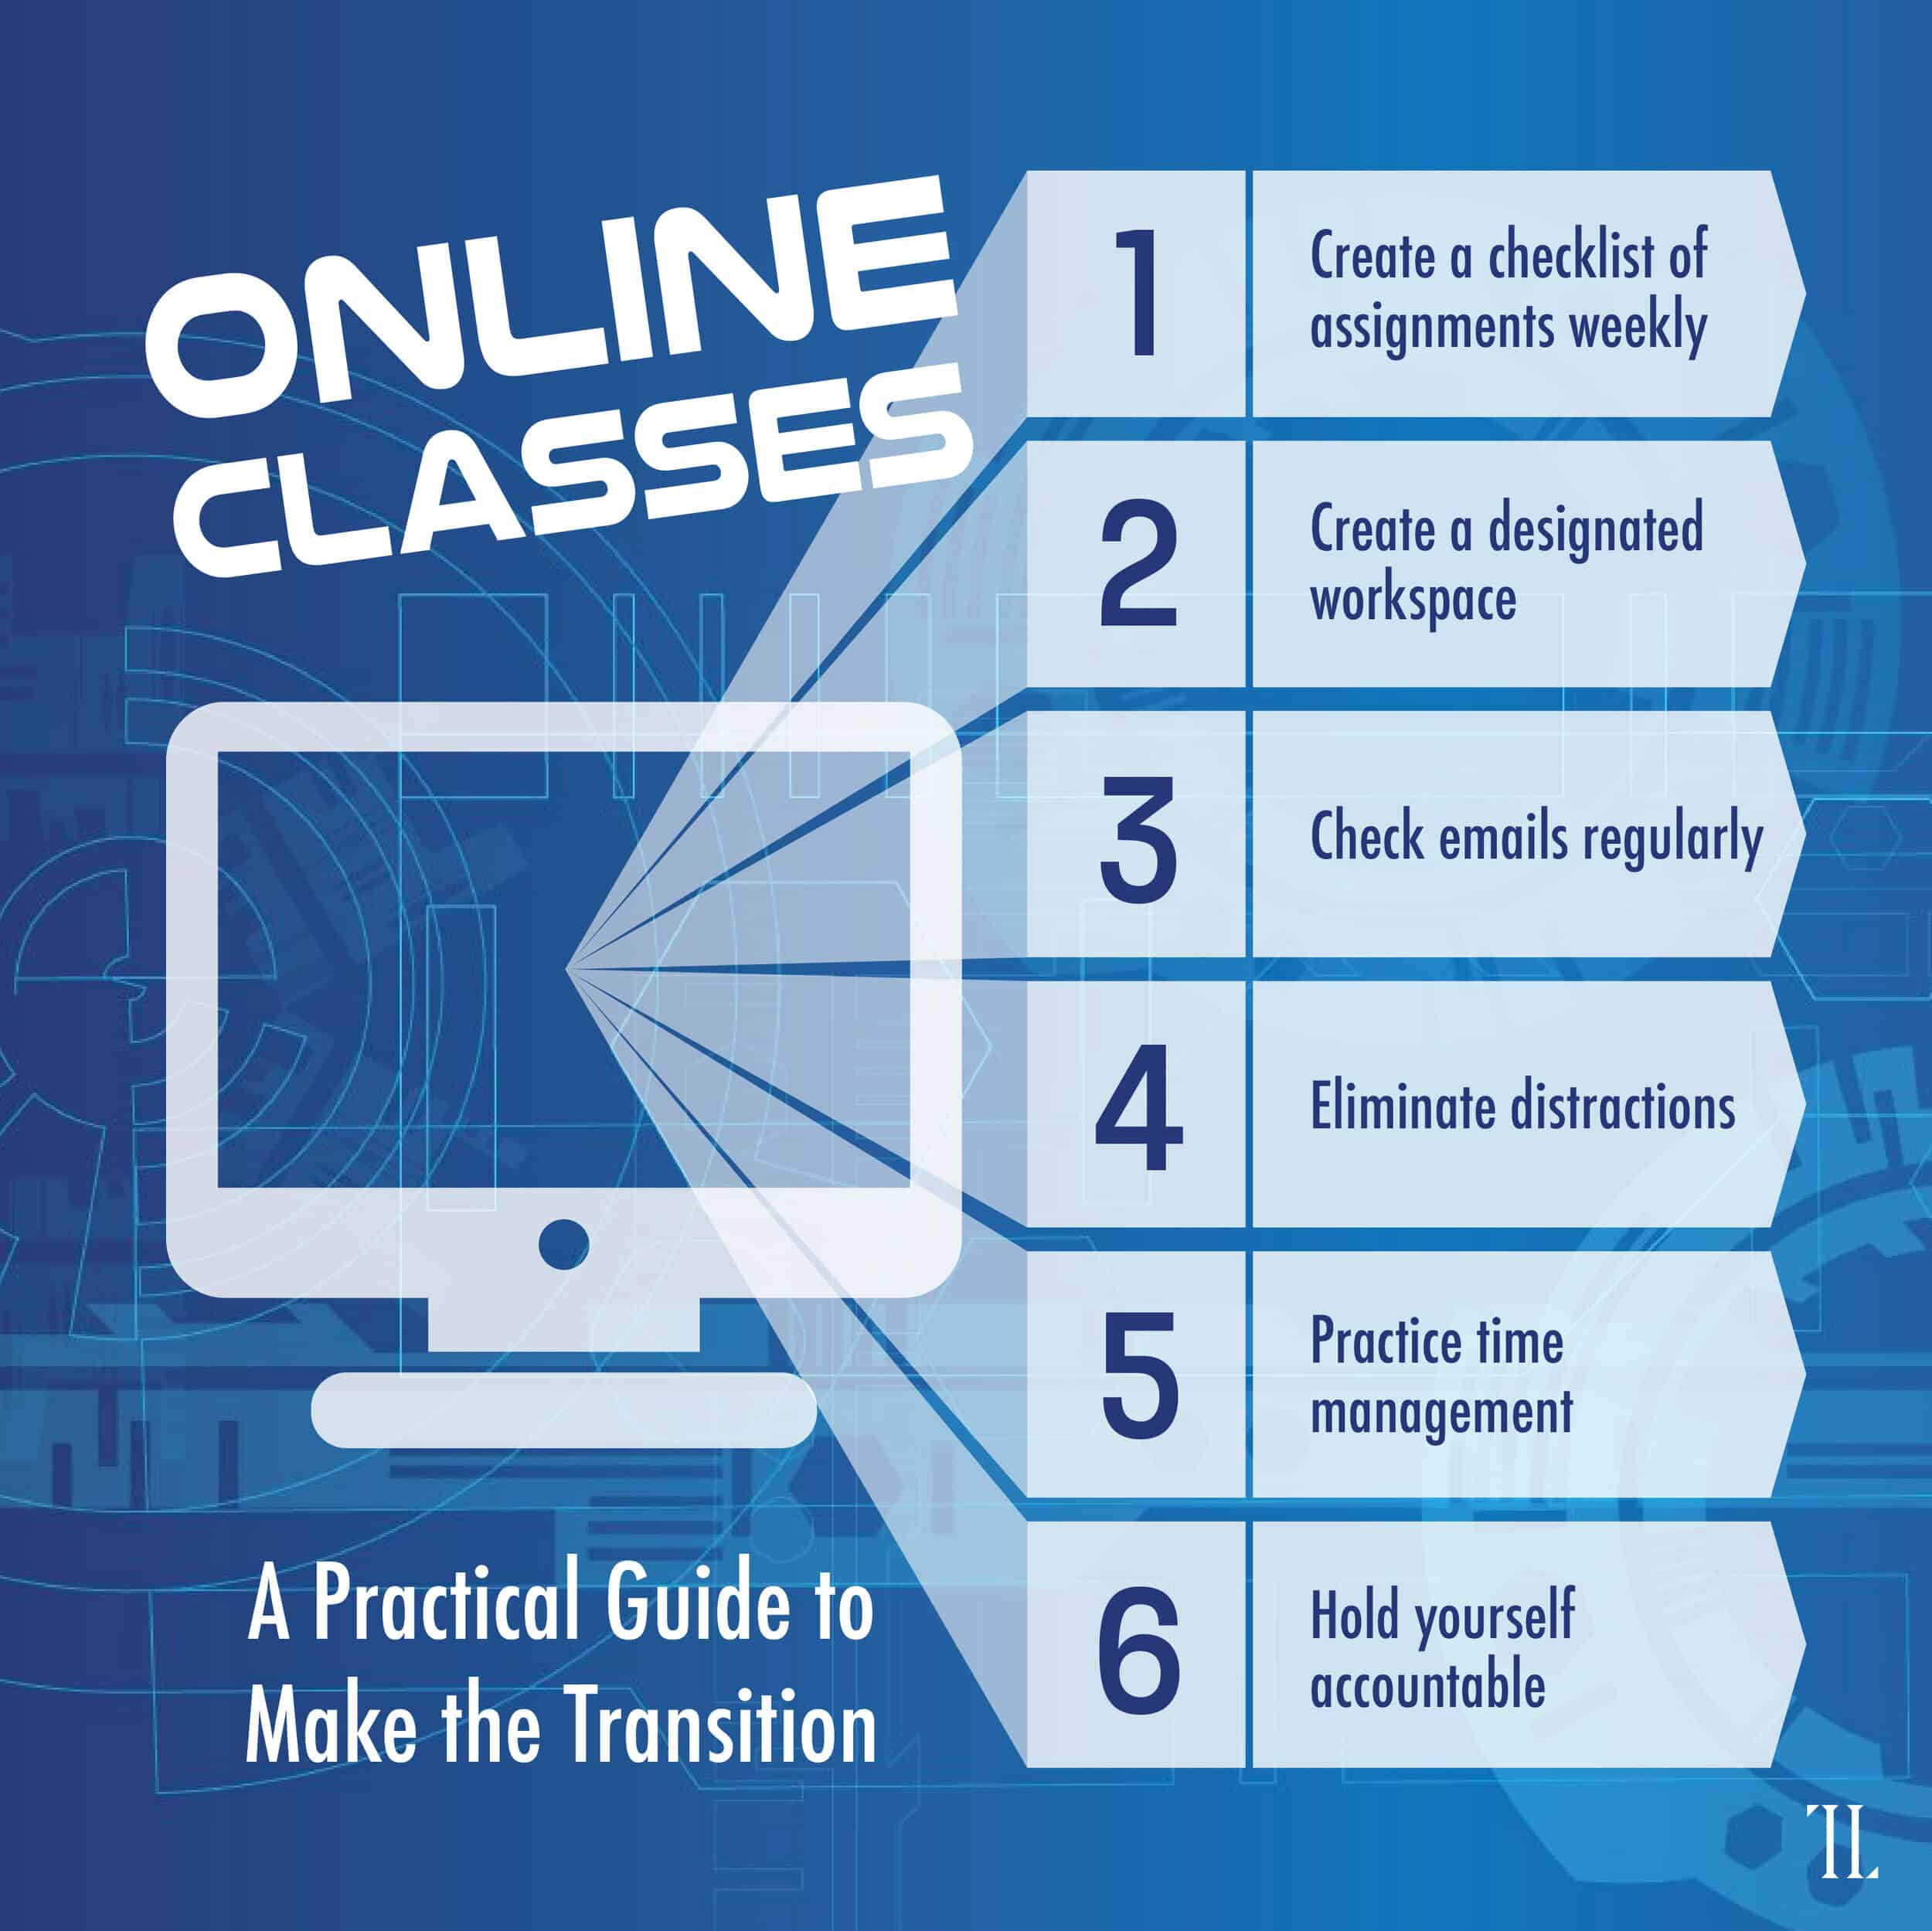 As we have all had to transition from traditional to online classes, here are a few tips to help you manage your classes a bit better.